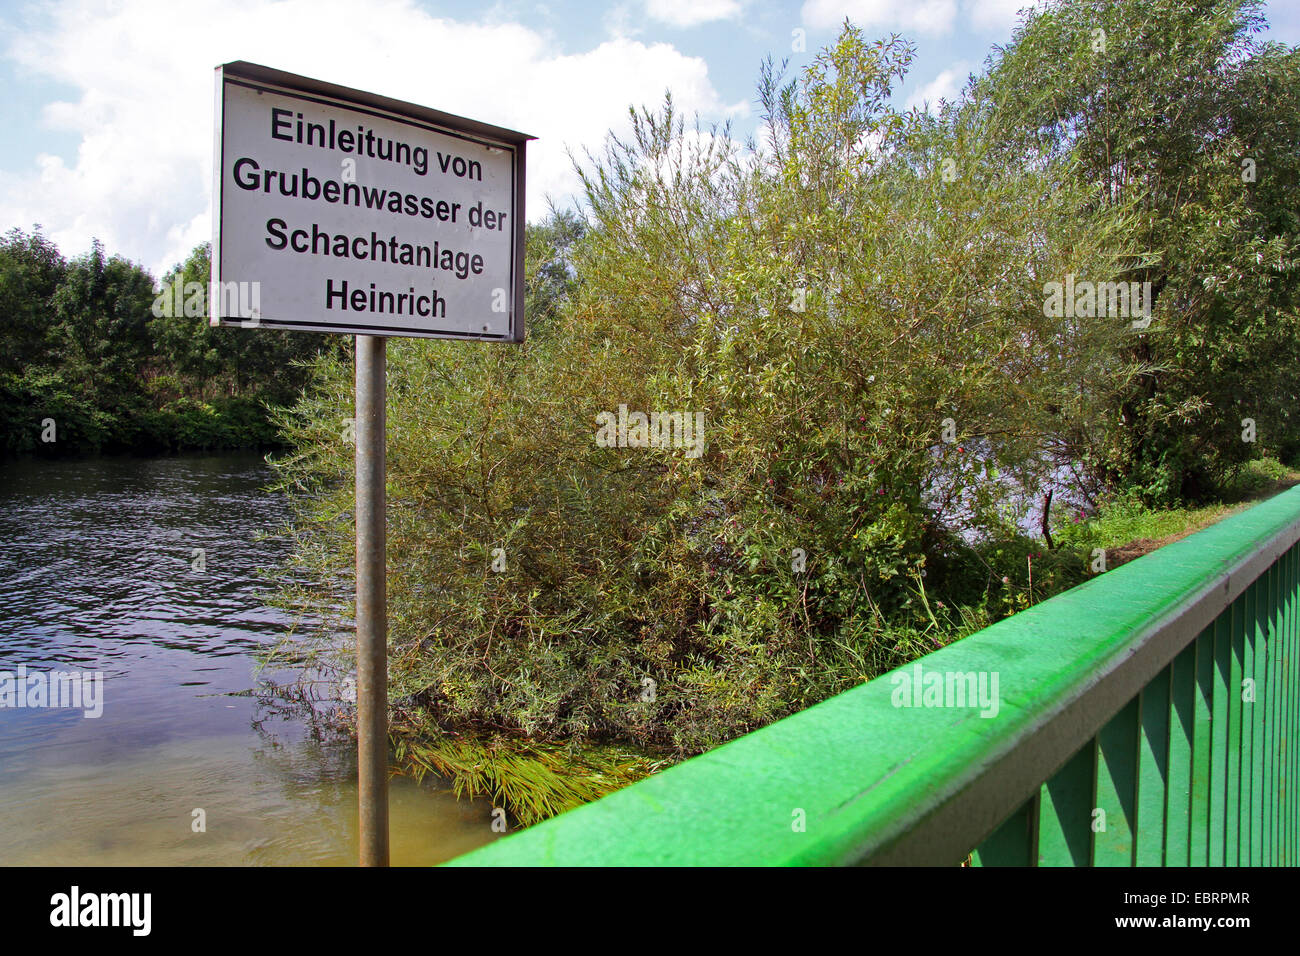 information sign for introduction of mine water into Ruhr river, Germany, North Rhine-Westphalia, Ruhr Area, Essen Stock Photo